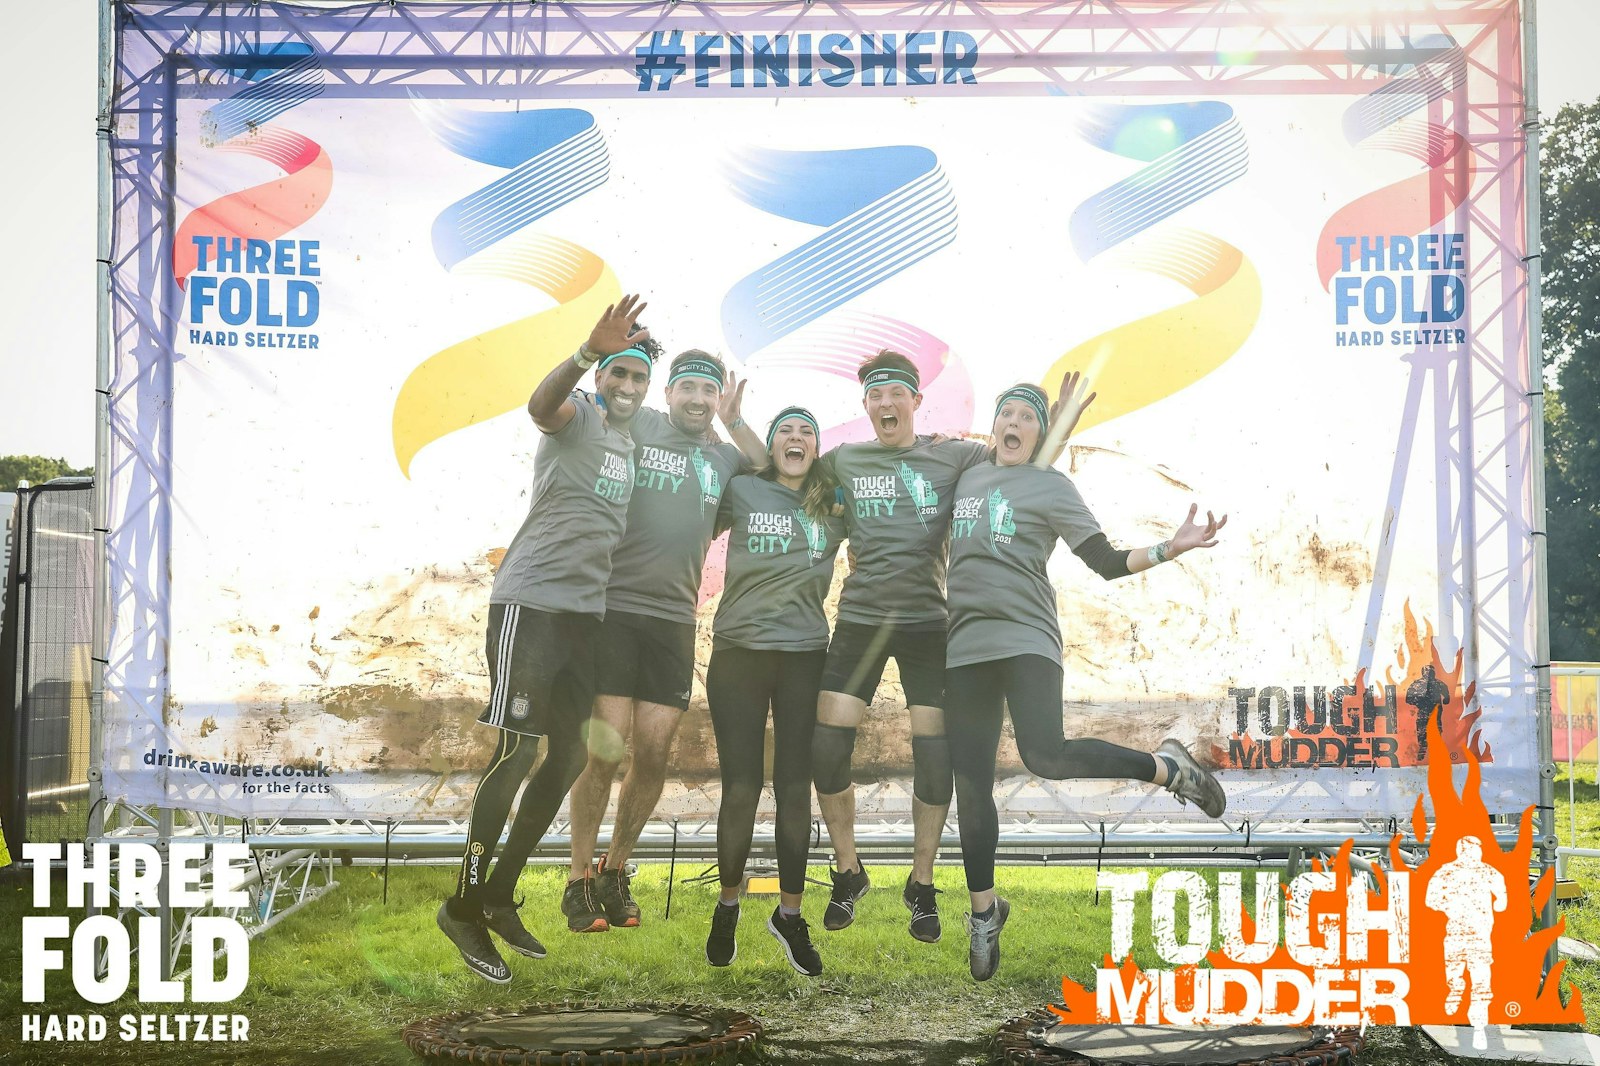 Fundraisers from Scheme Serve on the Morden Park 10k Tough Mudder course